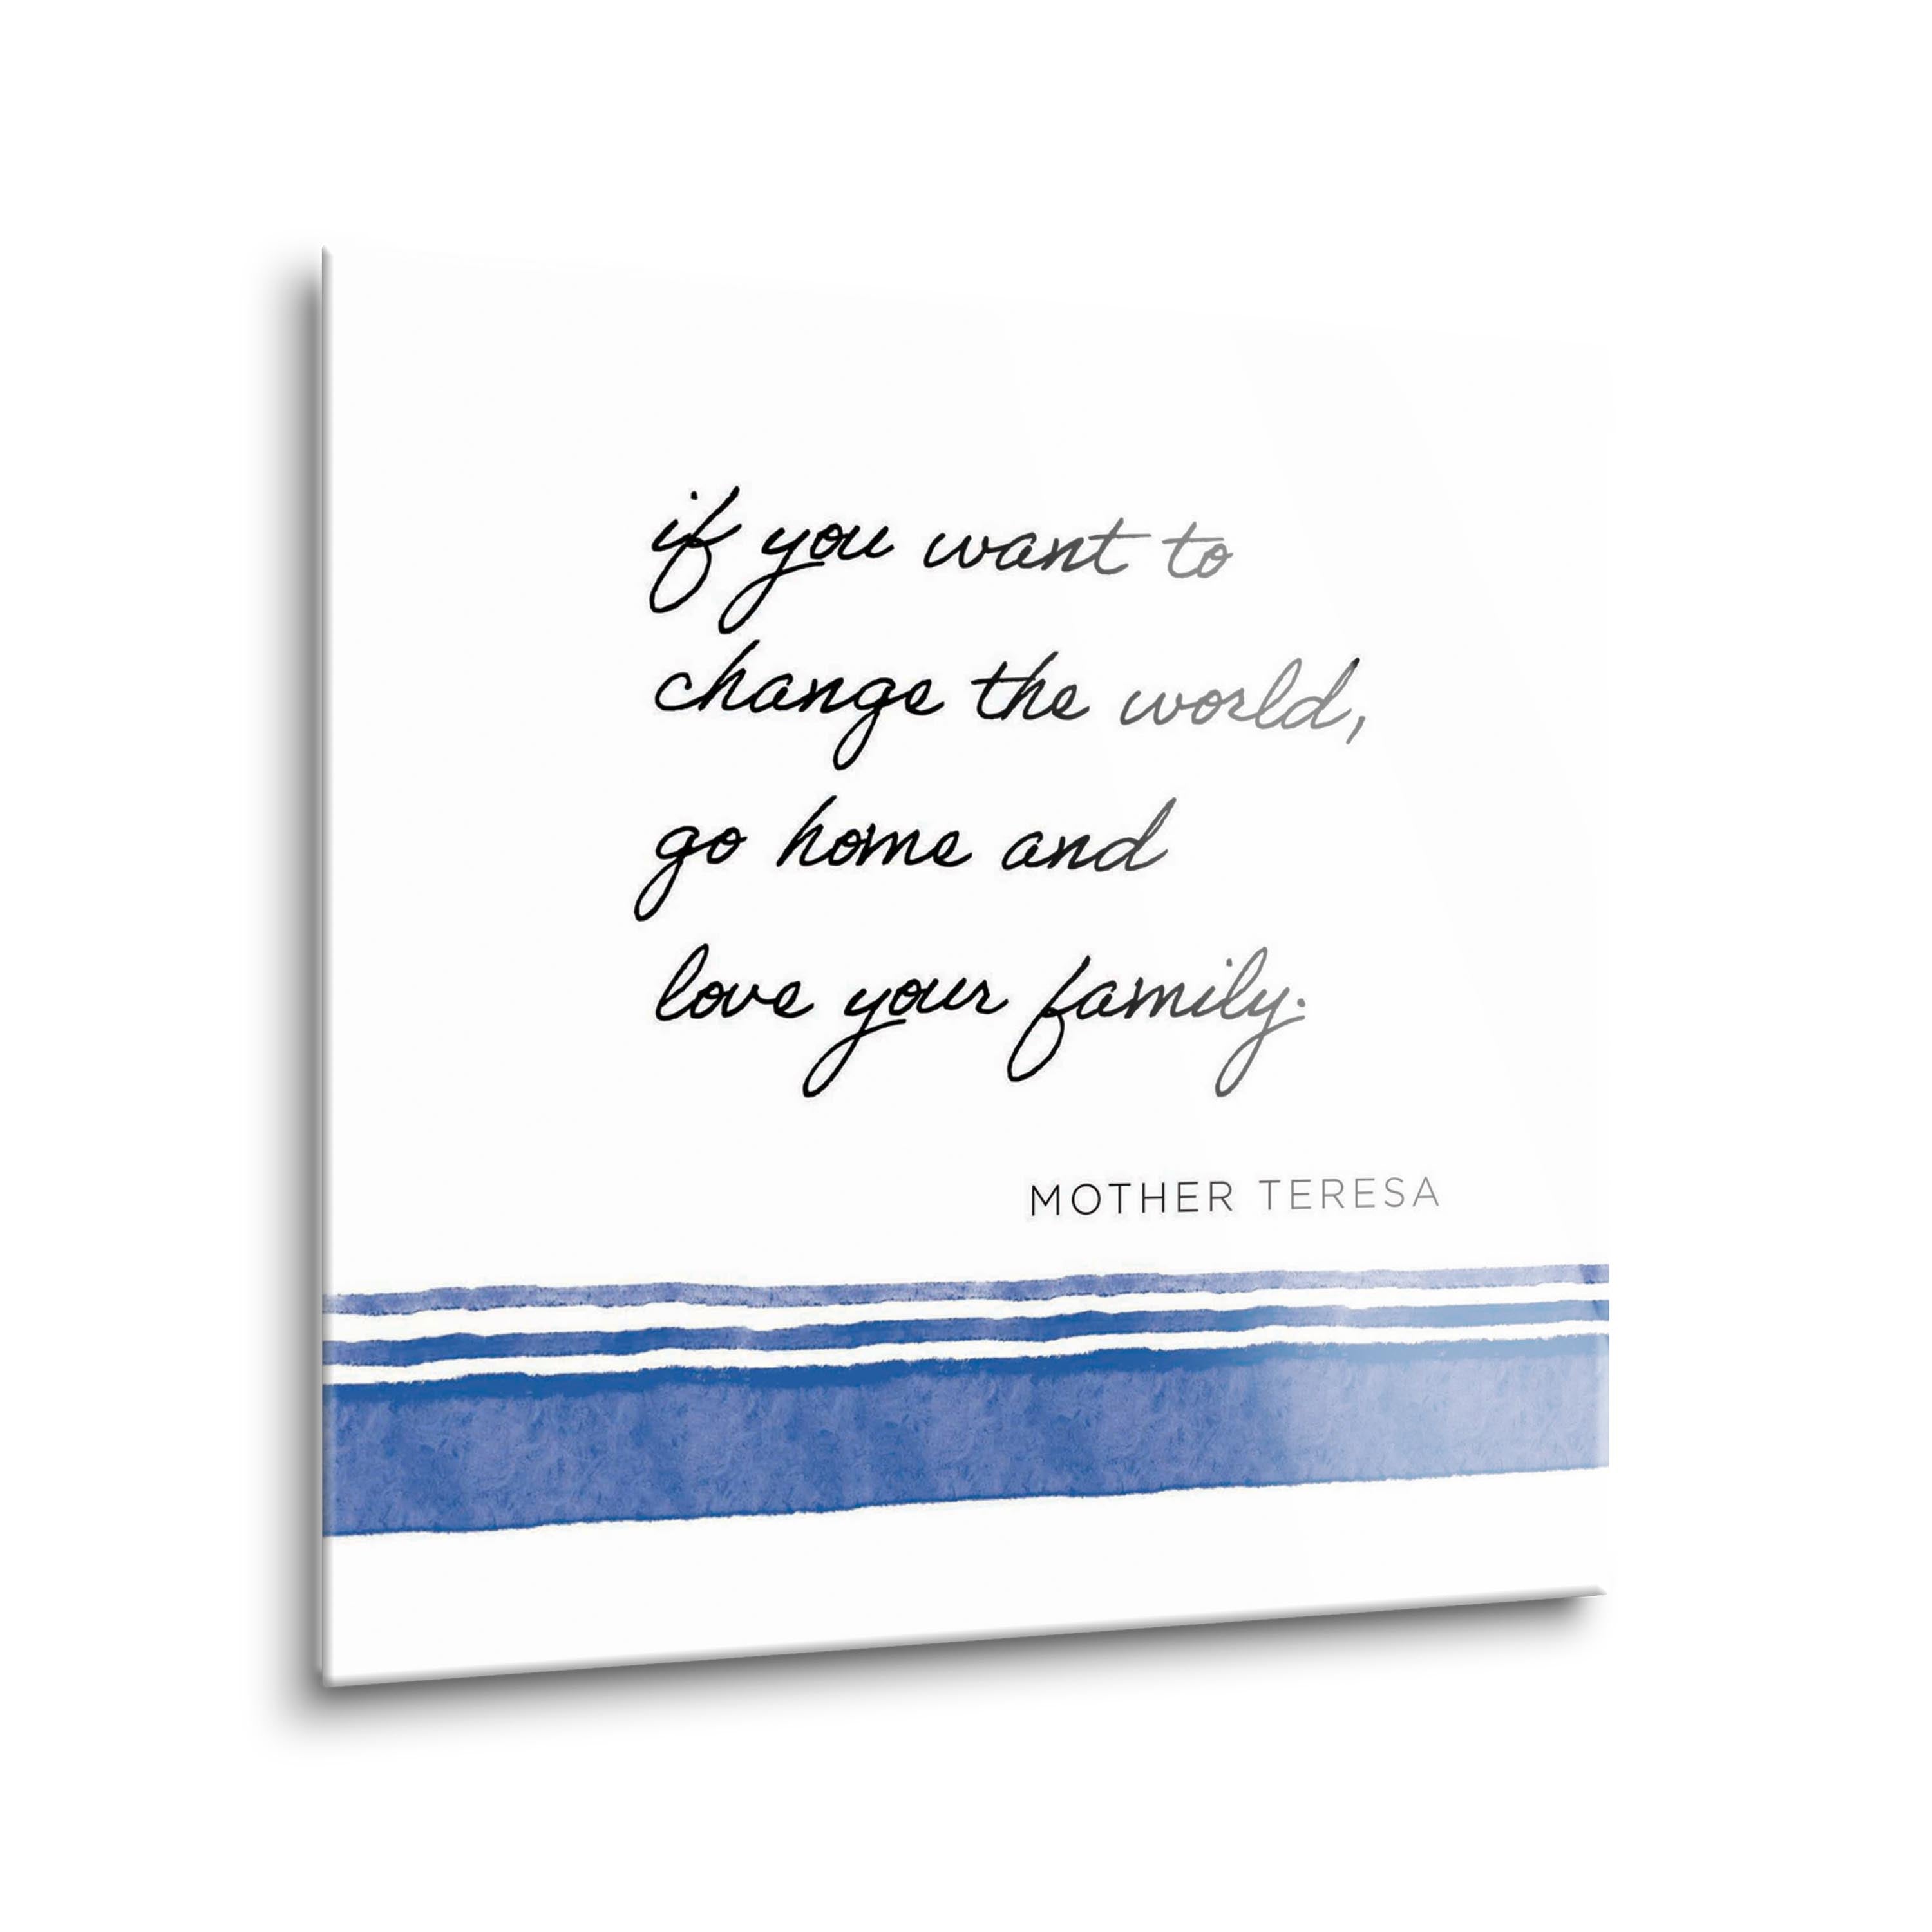 Love Your Family Square Glass Plaque-8"x8"